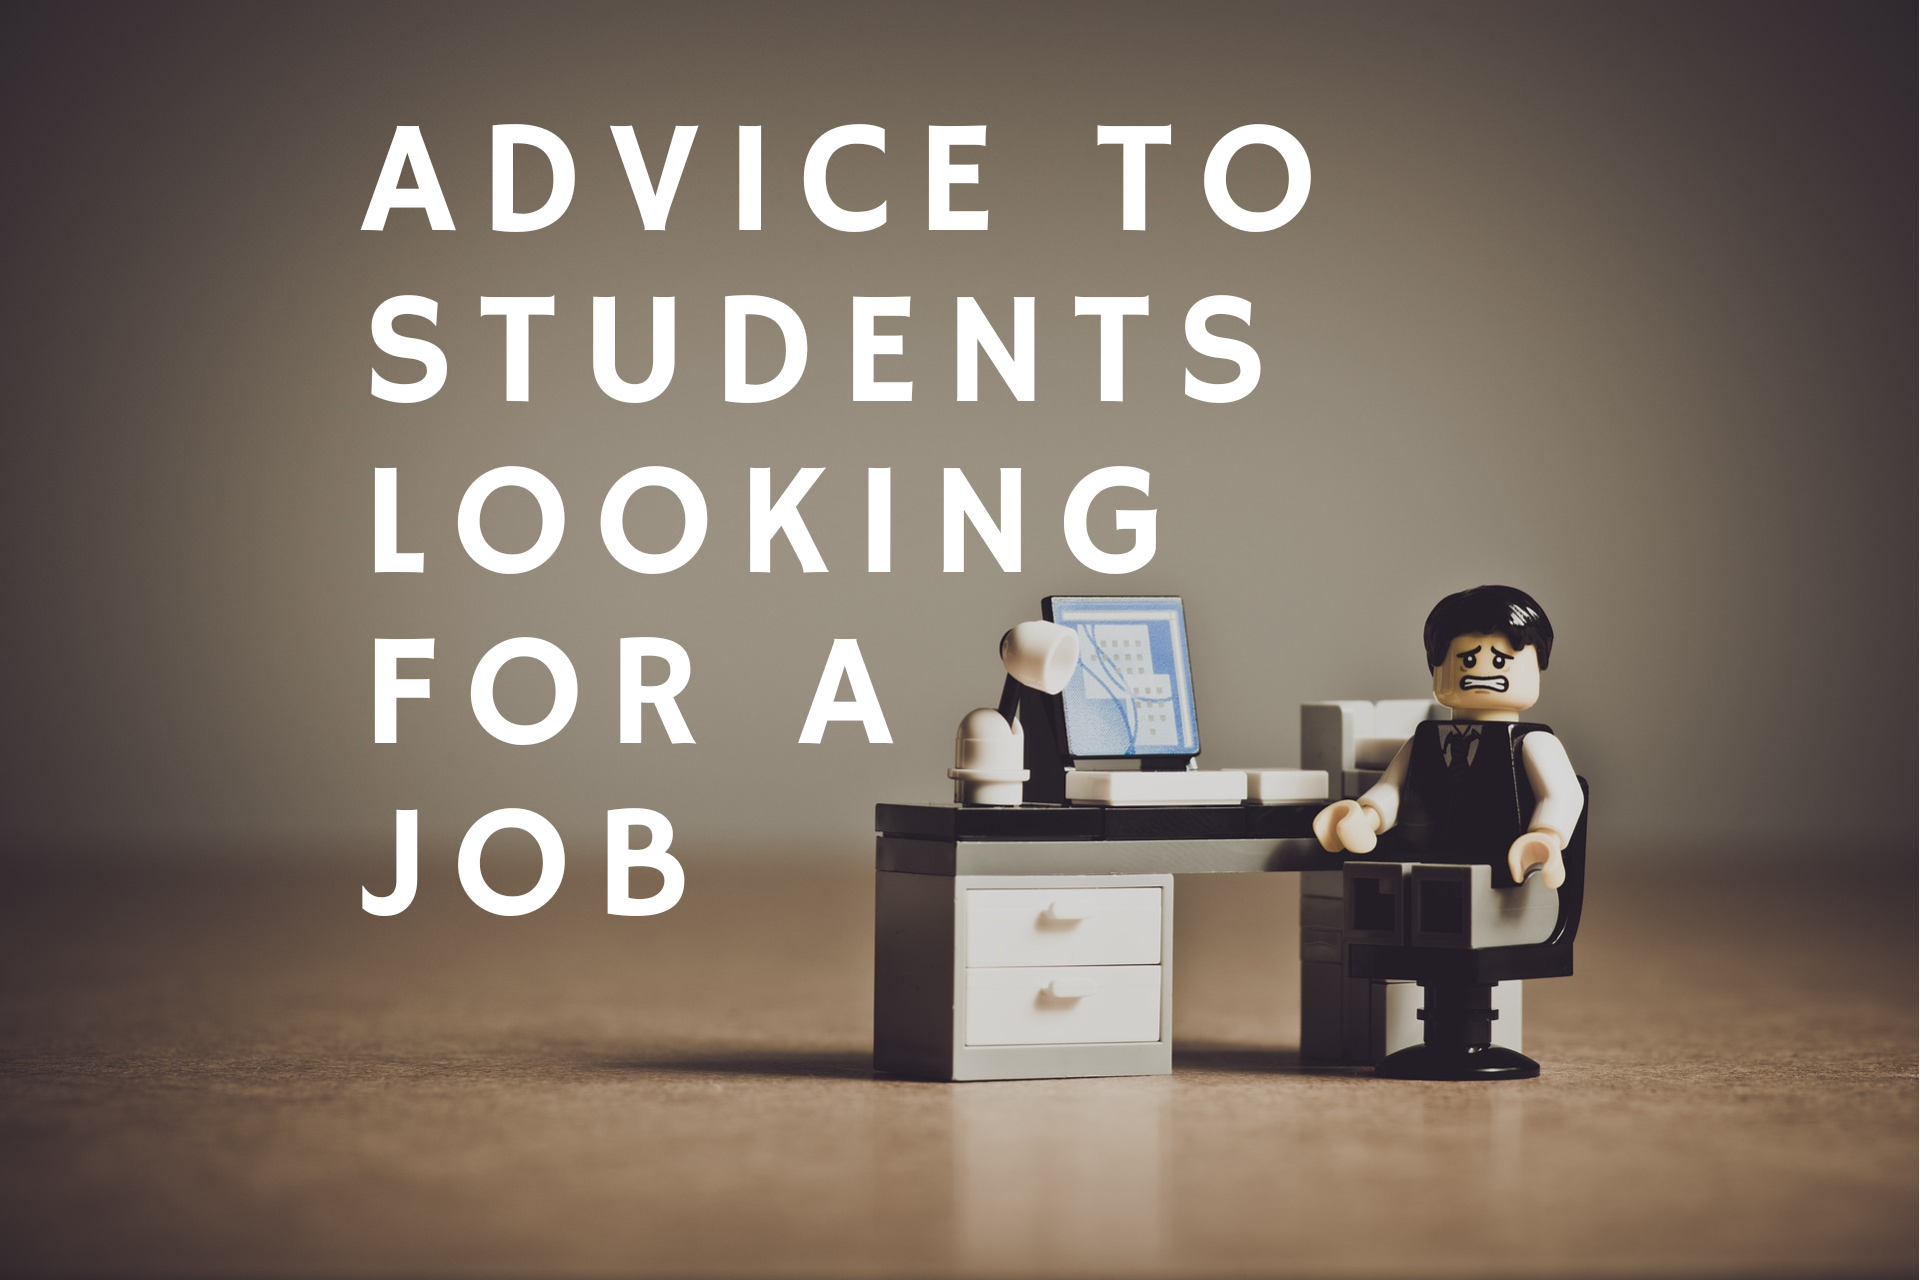 Advice to Students Looking for a Job